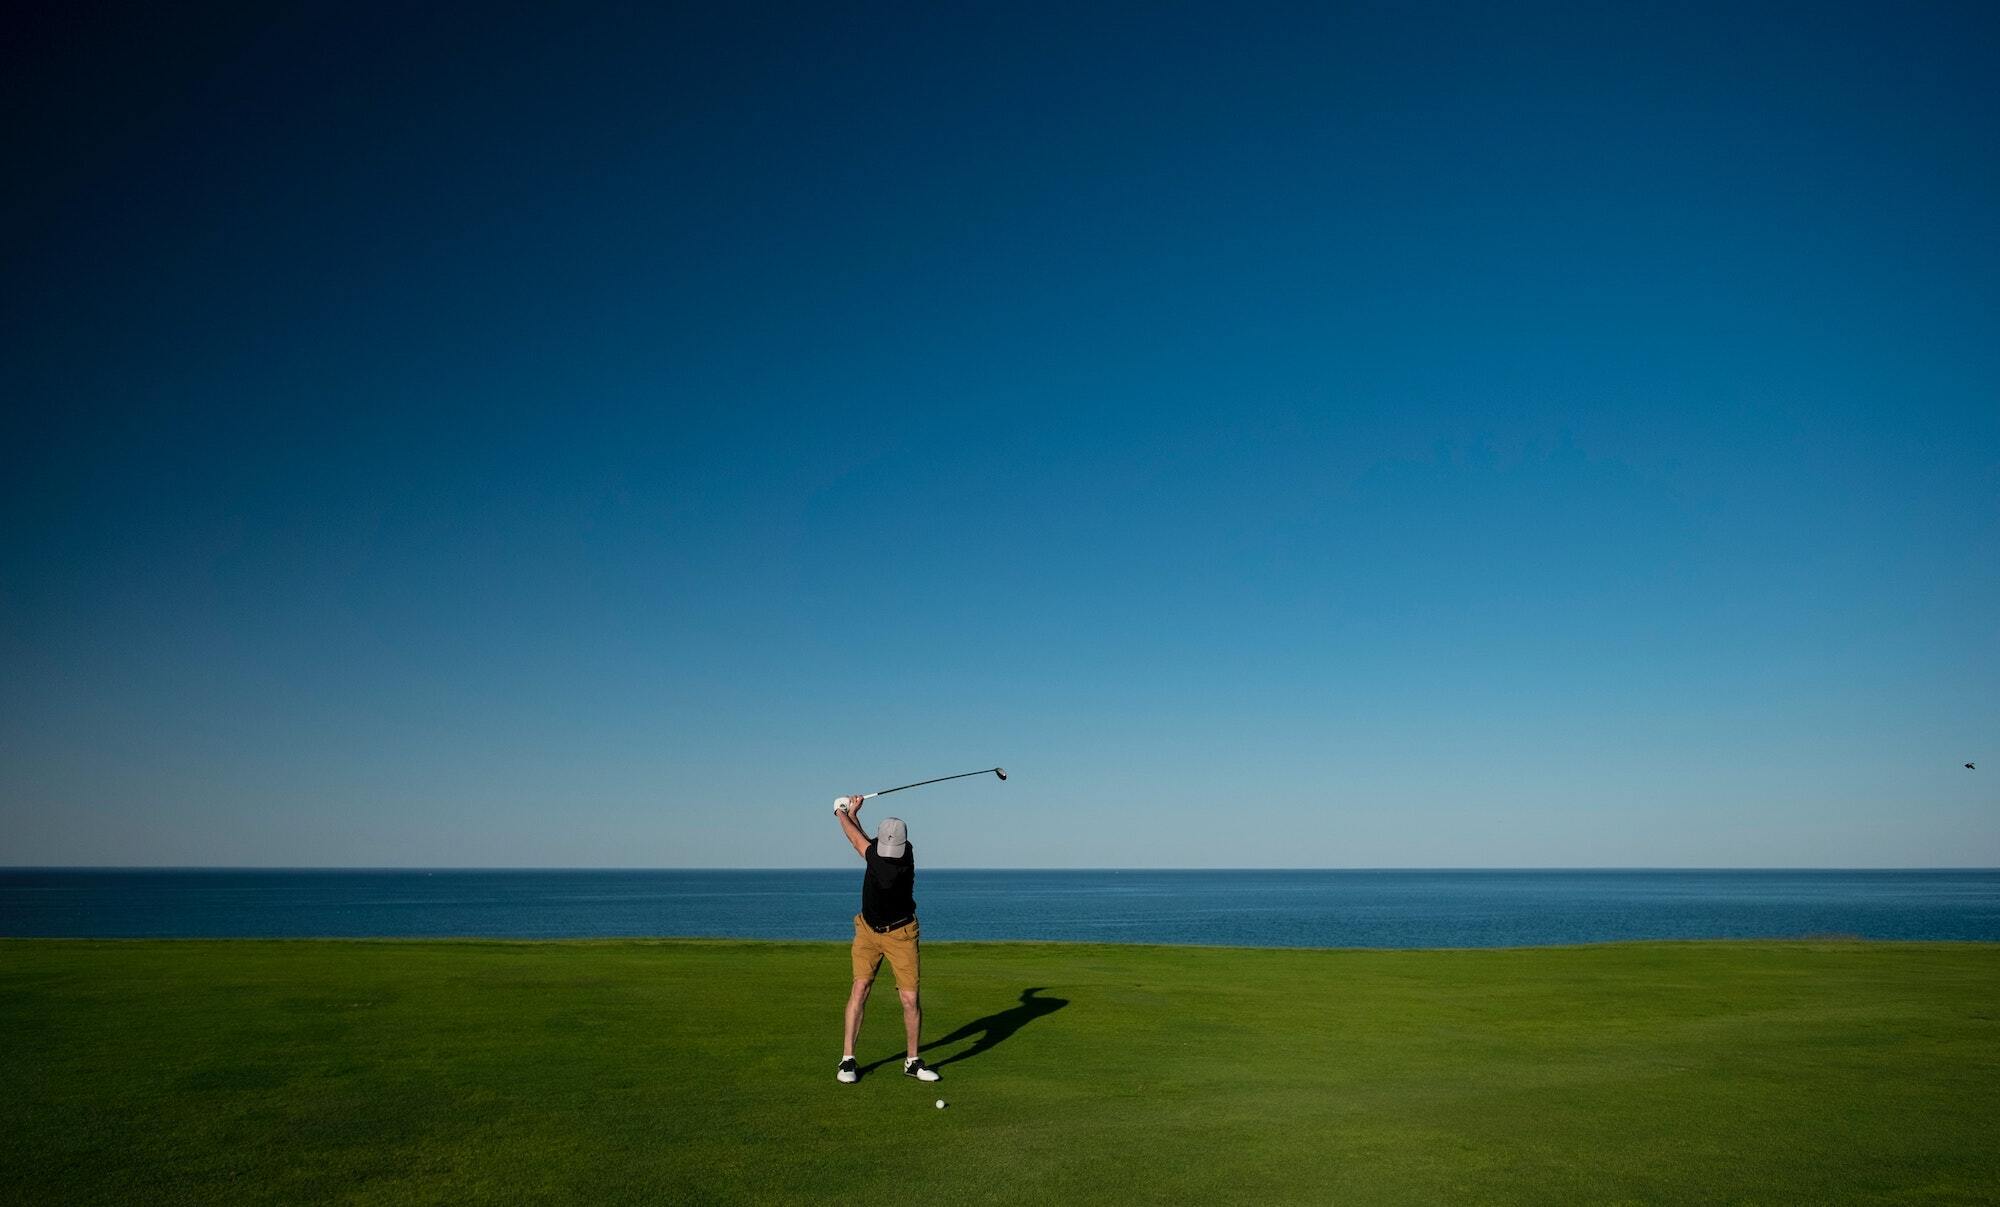 Man swinging golf club with blue sky and ocean in background